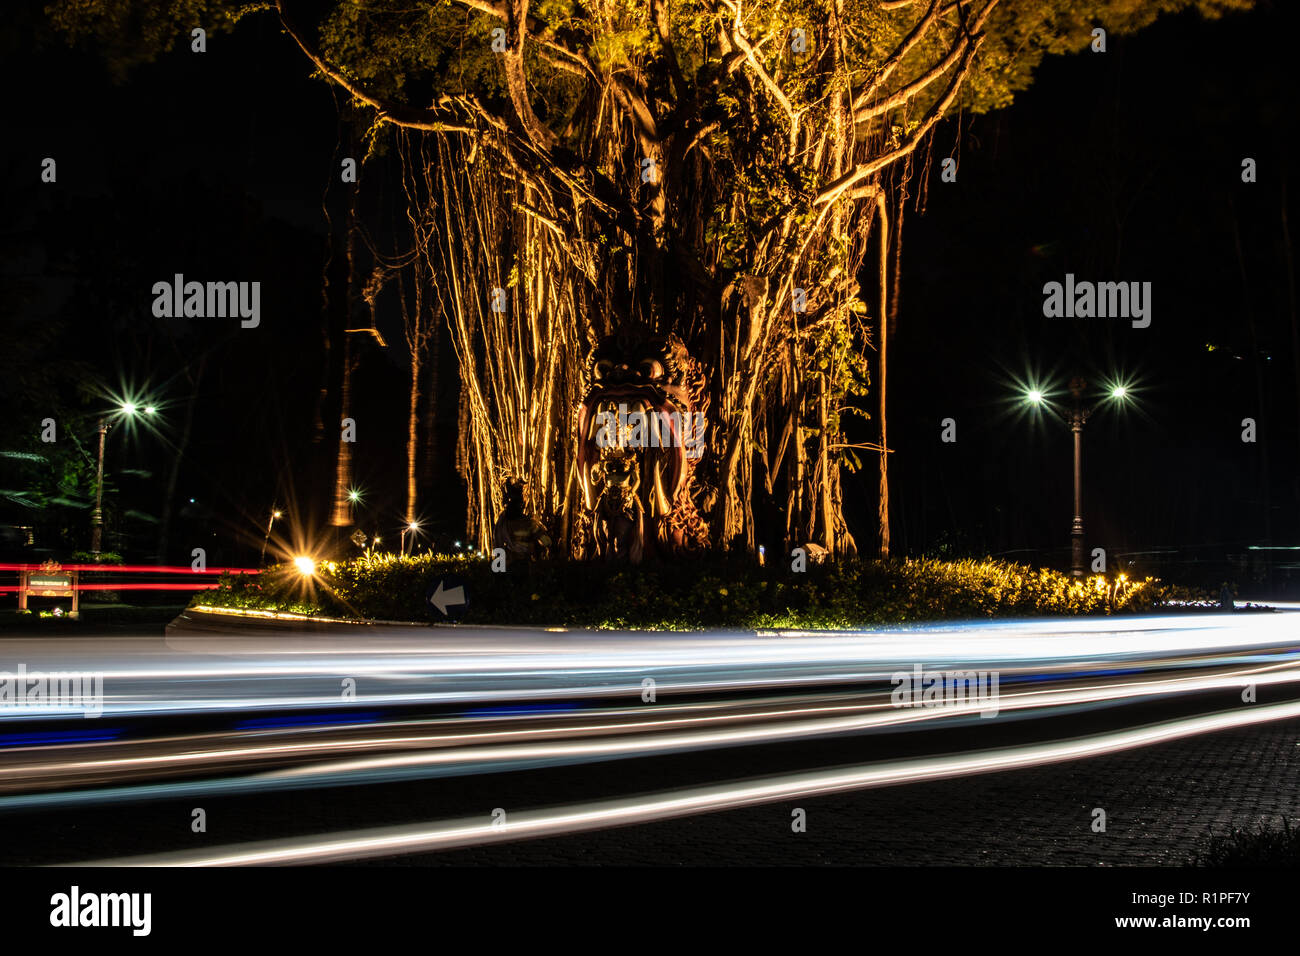 Blurred motion of a ray of light on the road next to the chimerical Indonesian tree. Interesting and abstract lights in orange that can be used as background or texture Stock Photo